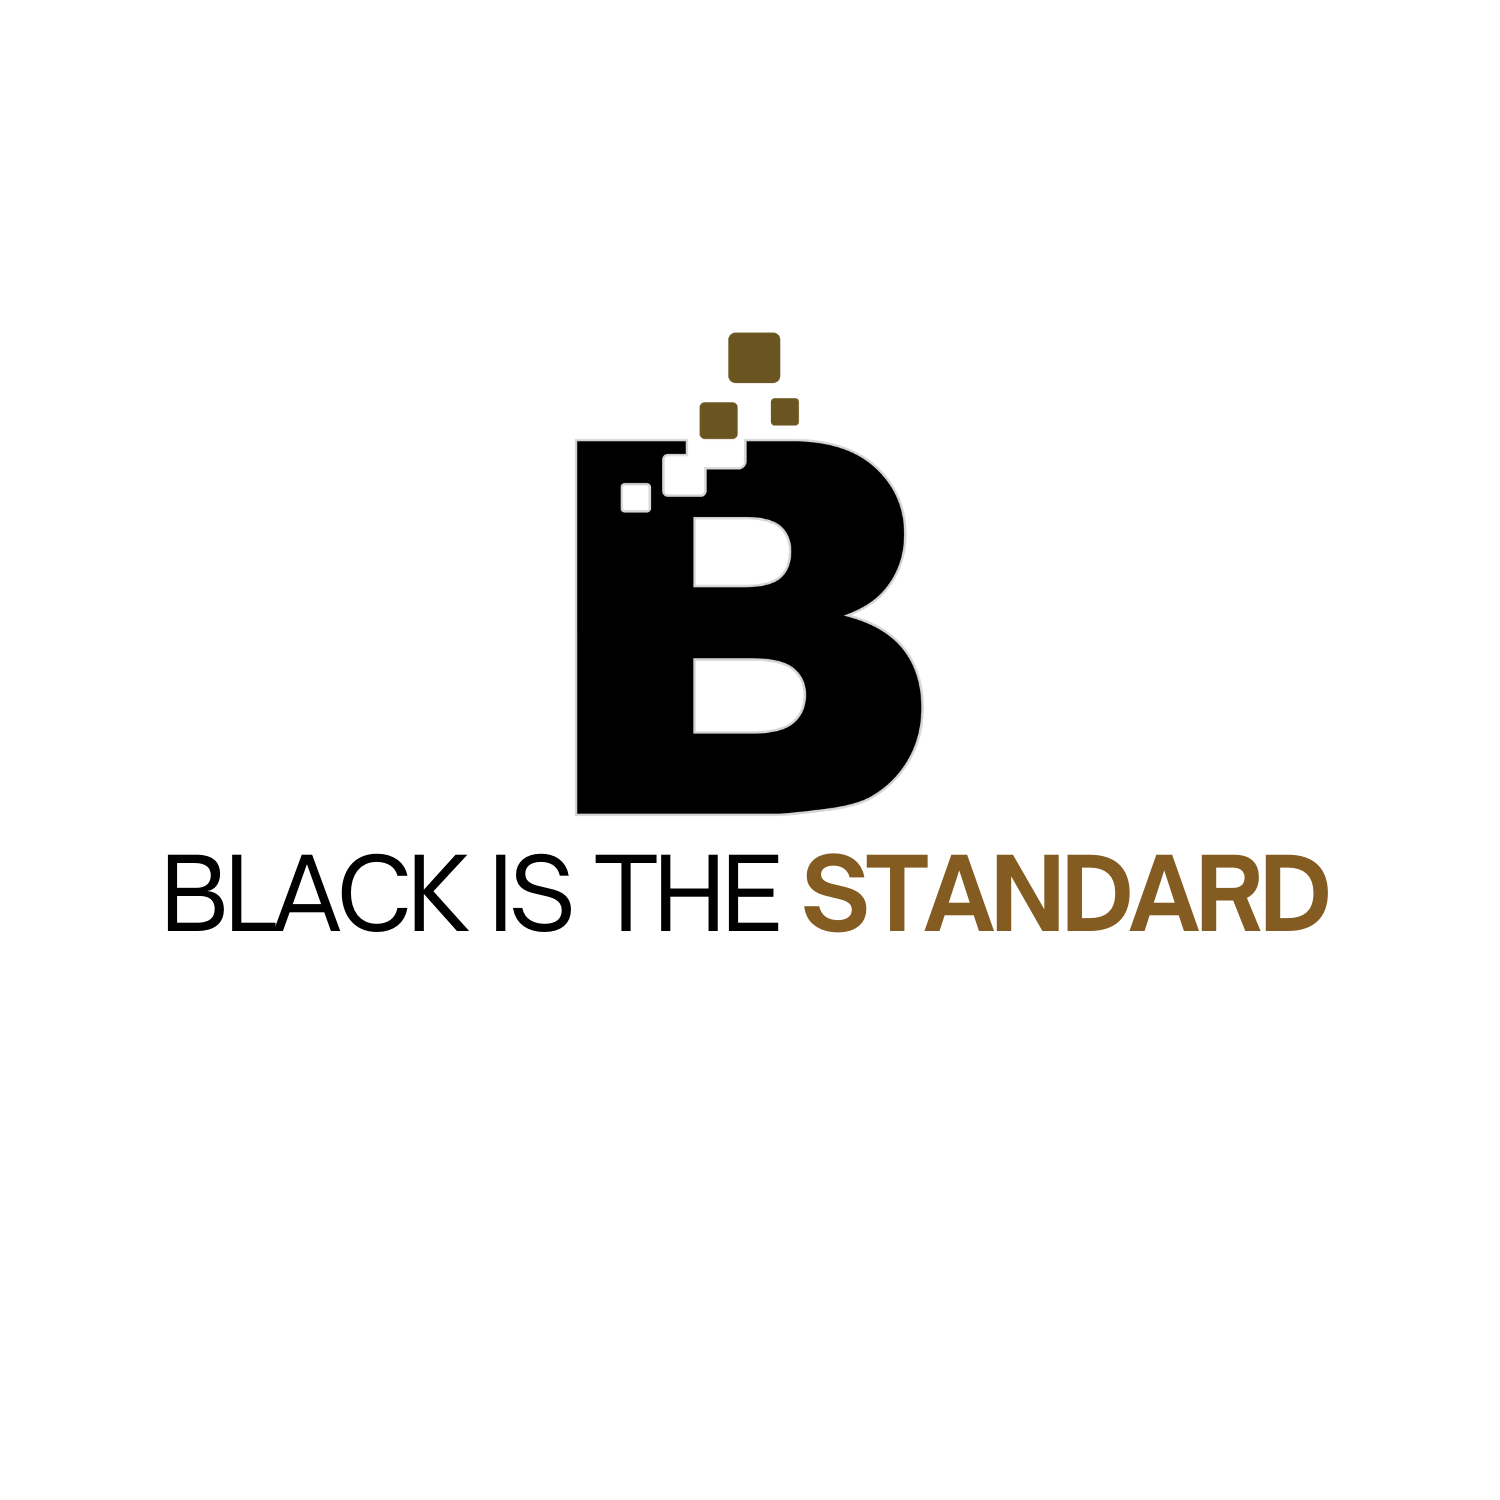 Black Is The Standard ™